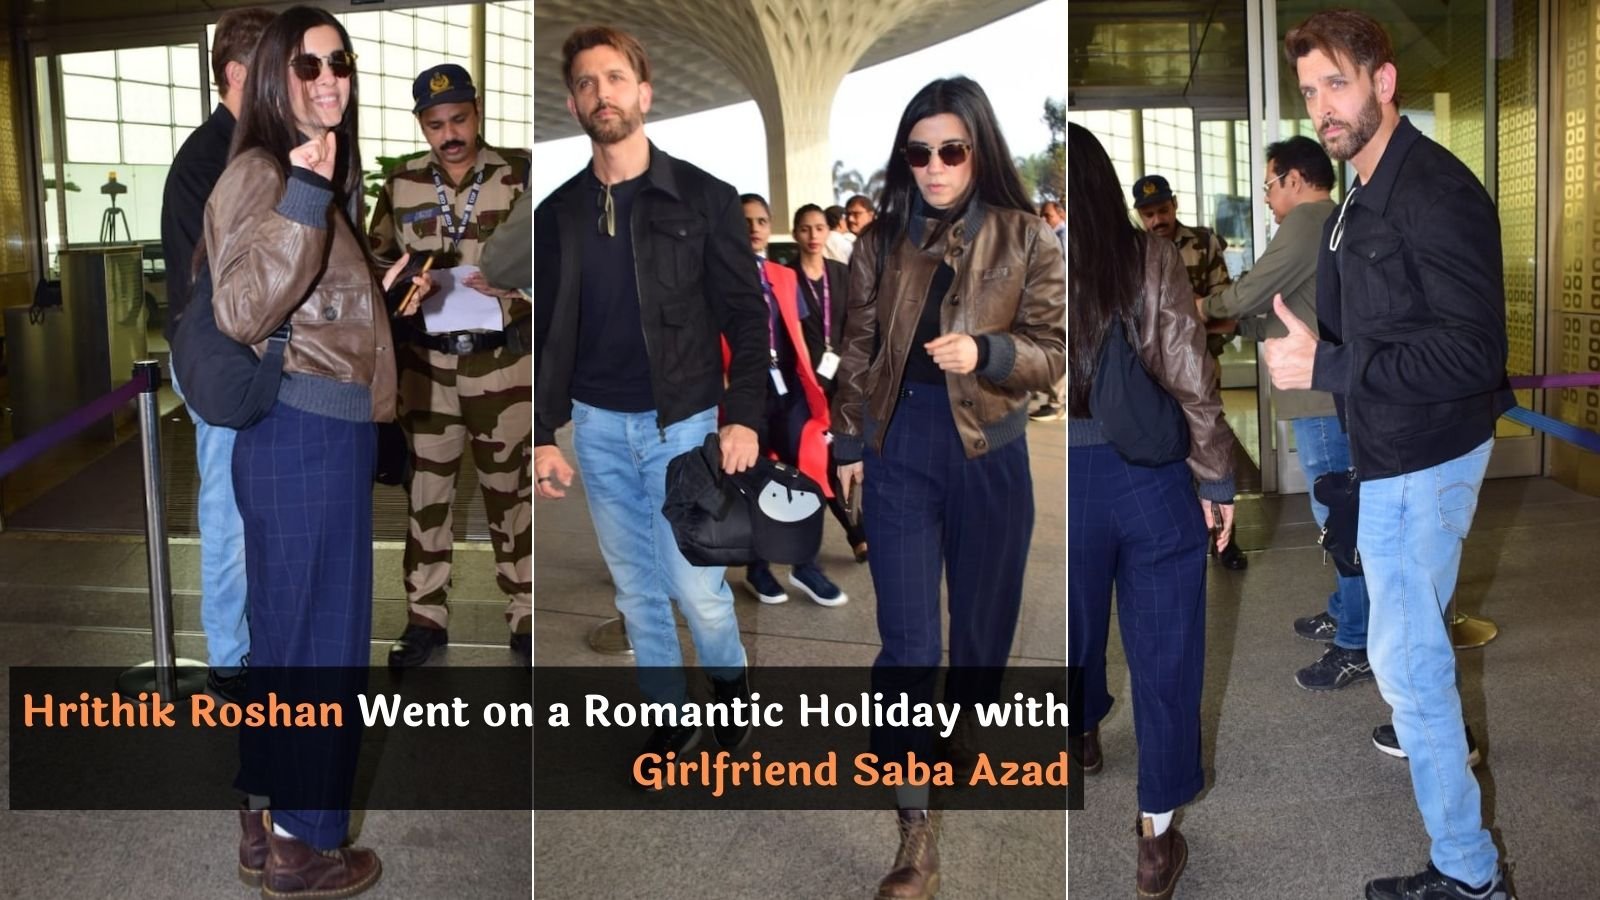 Hrithik Roshan Went on a Romantic Holiday with Girlfriend Saba Azad